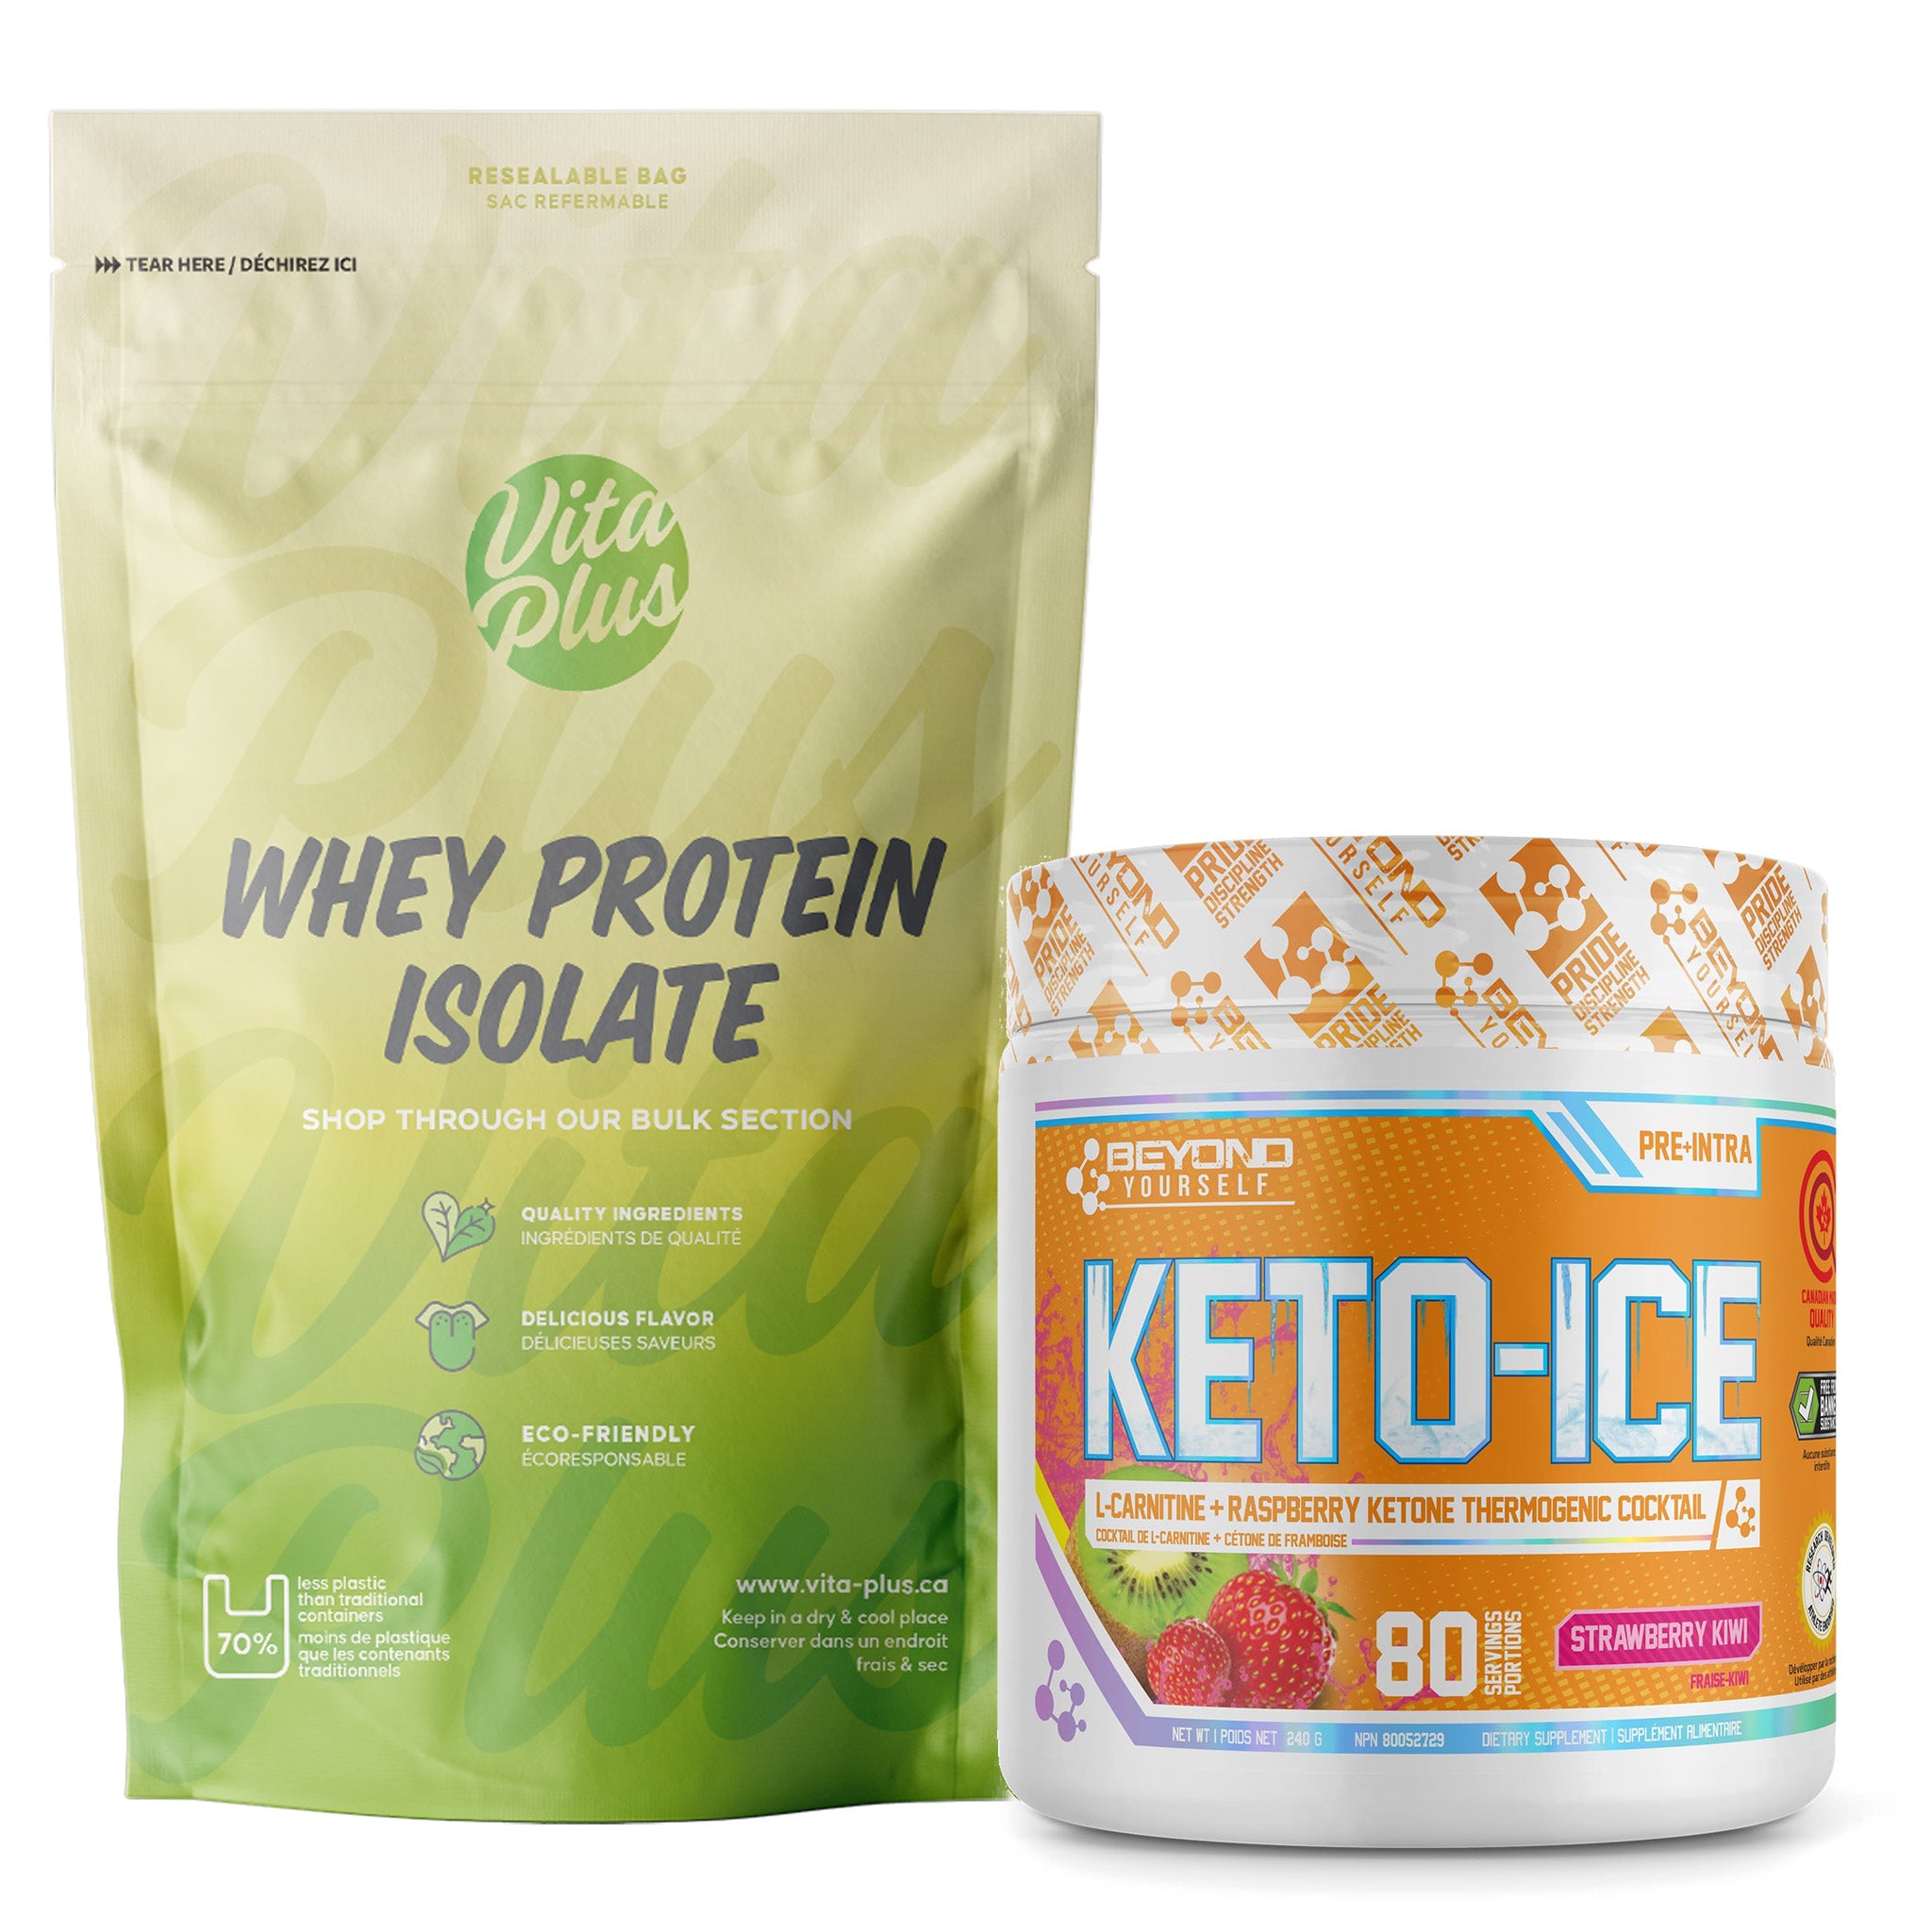 [COMBO] Bulk Whey Protein Isolate (5lbs) + Keto-Ice (80 Servings)